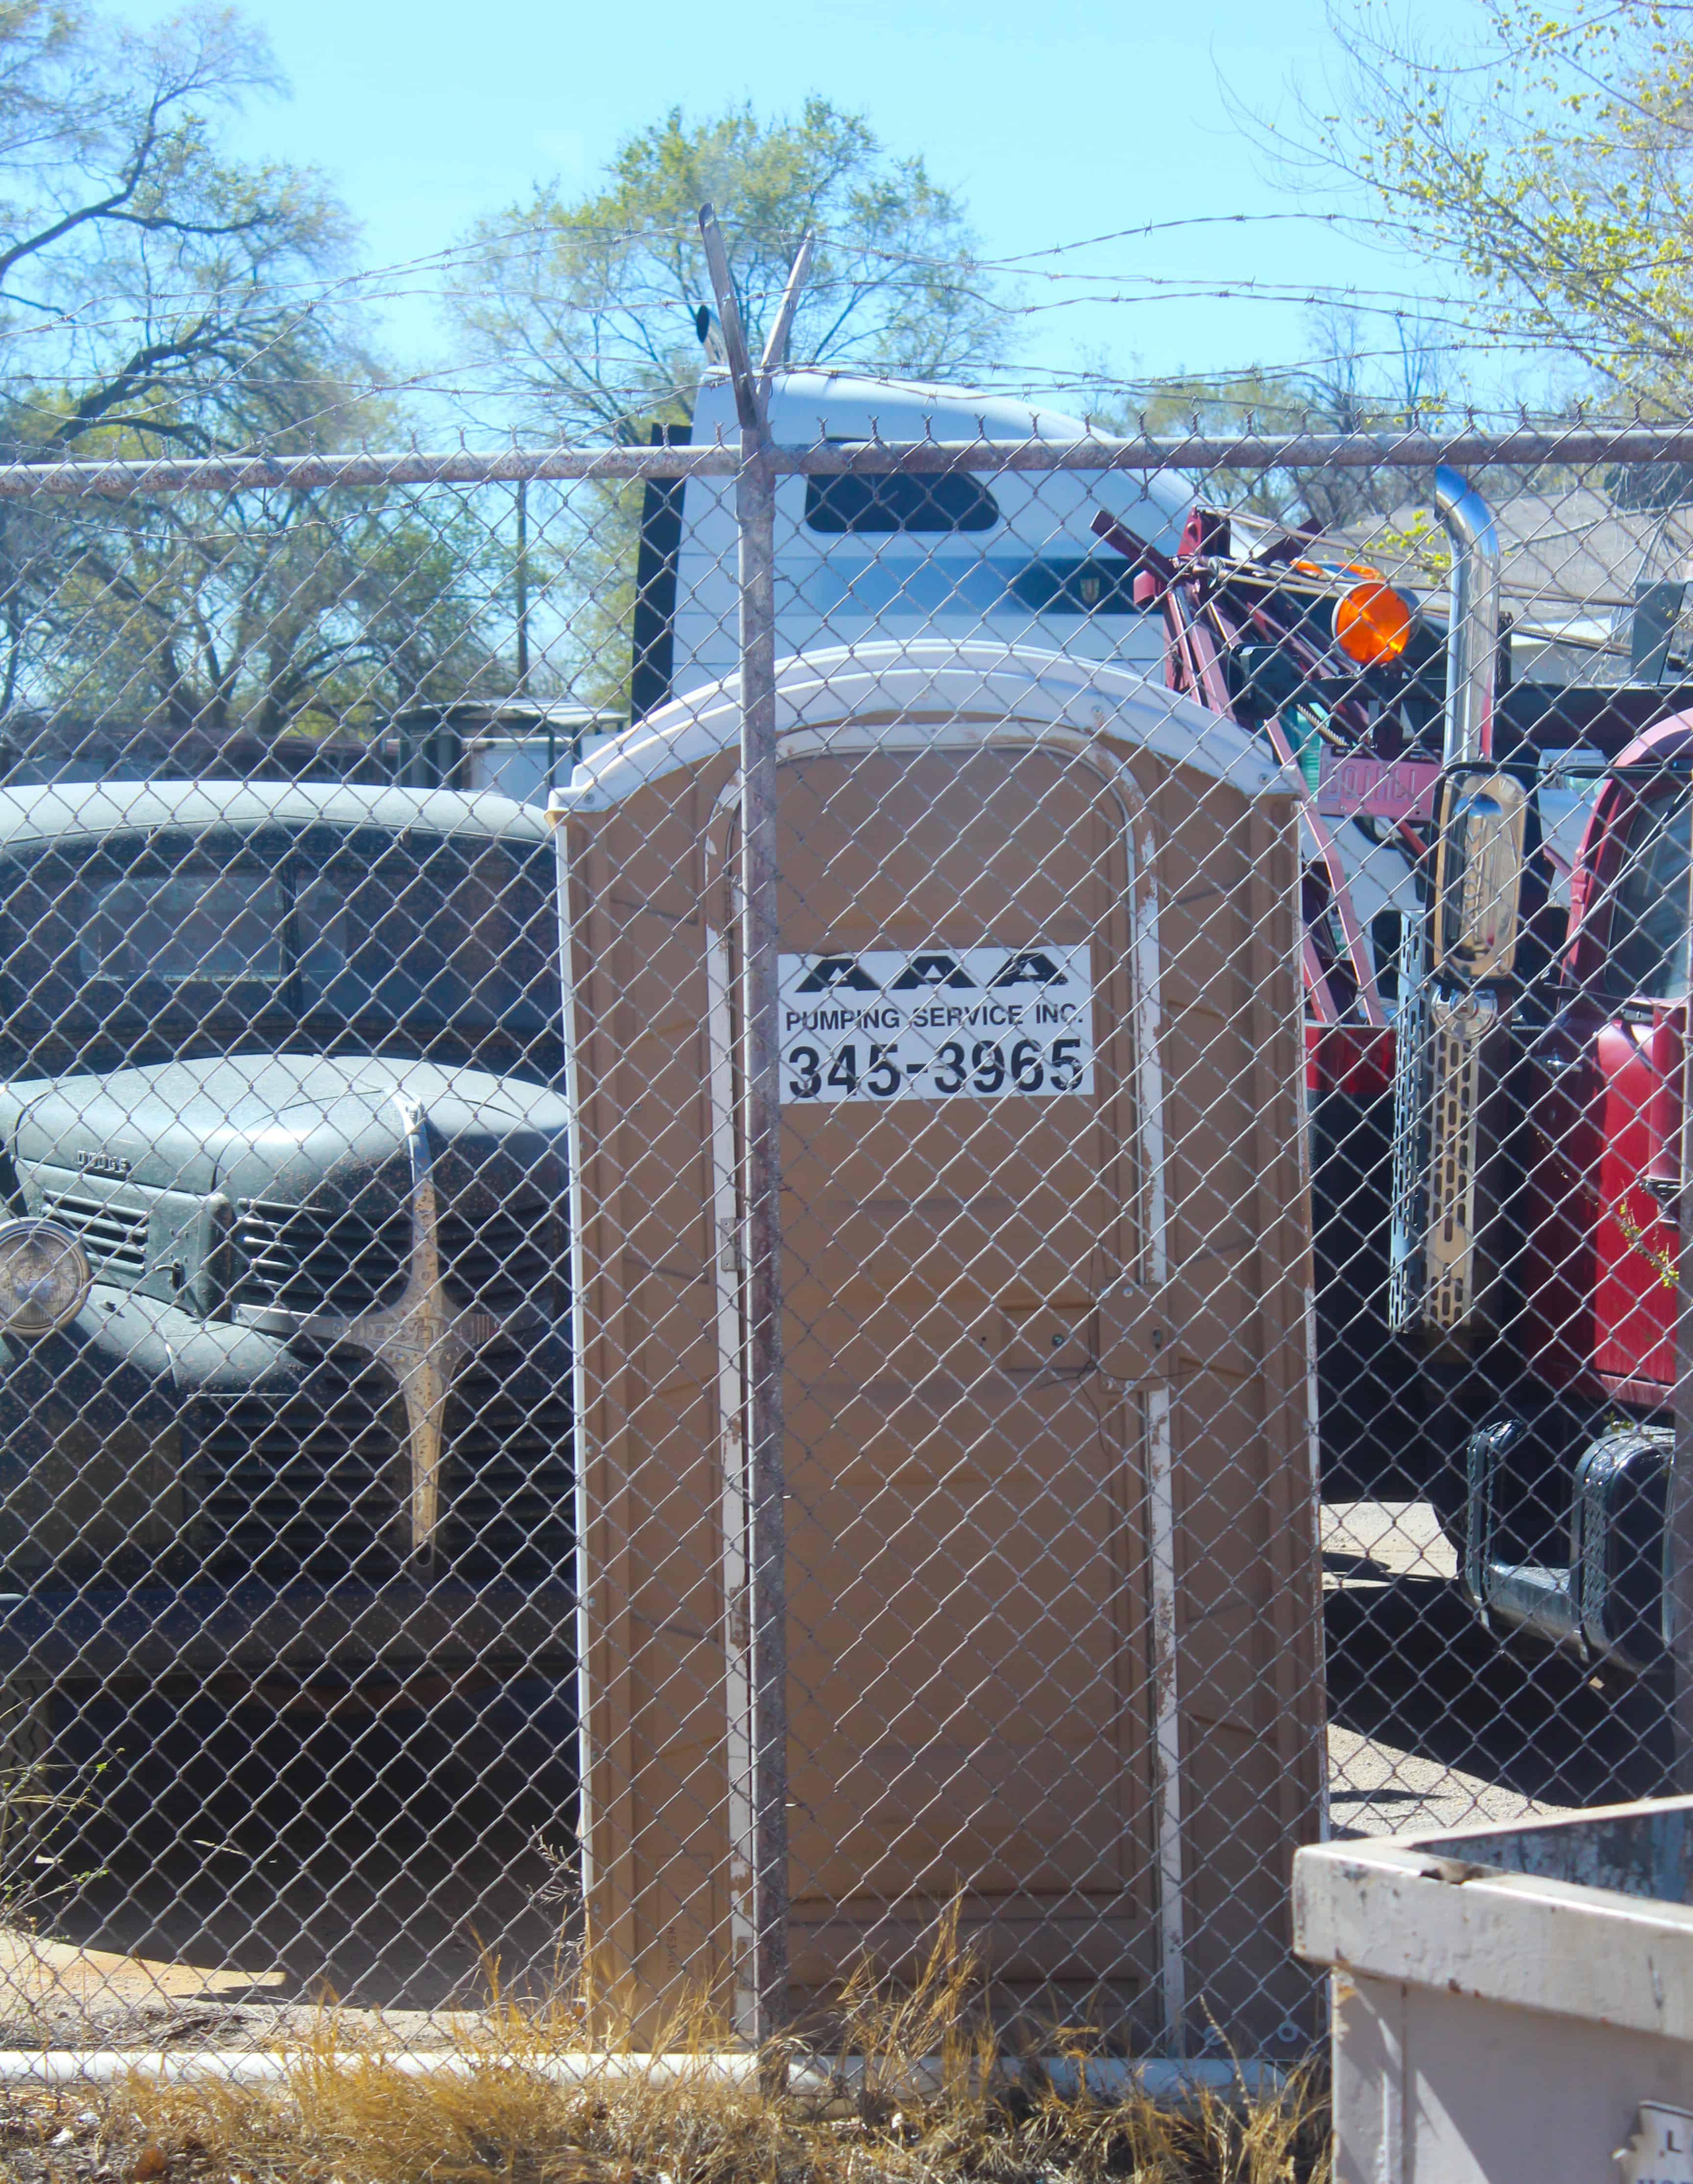 The Infamous Port-a-Potty at the Breaking Bad Junkyard